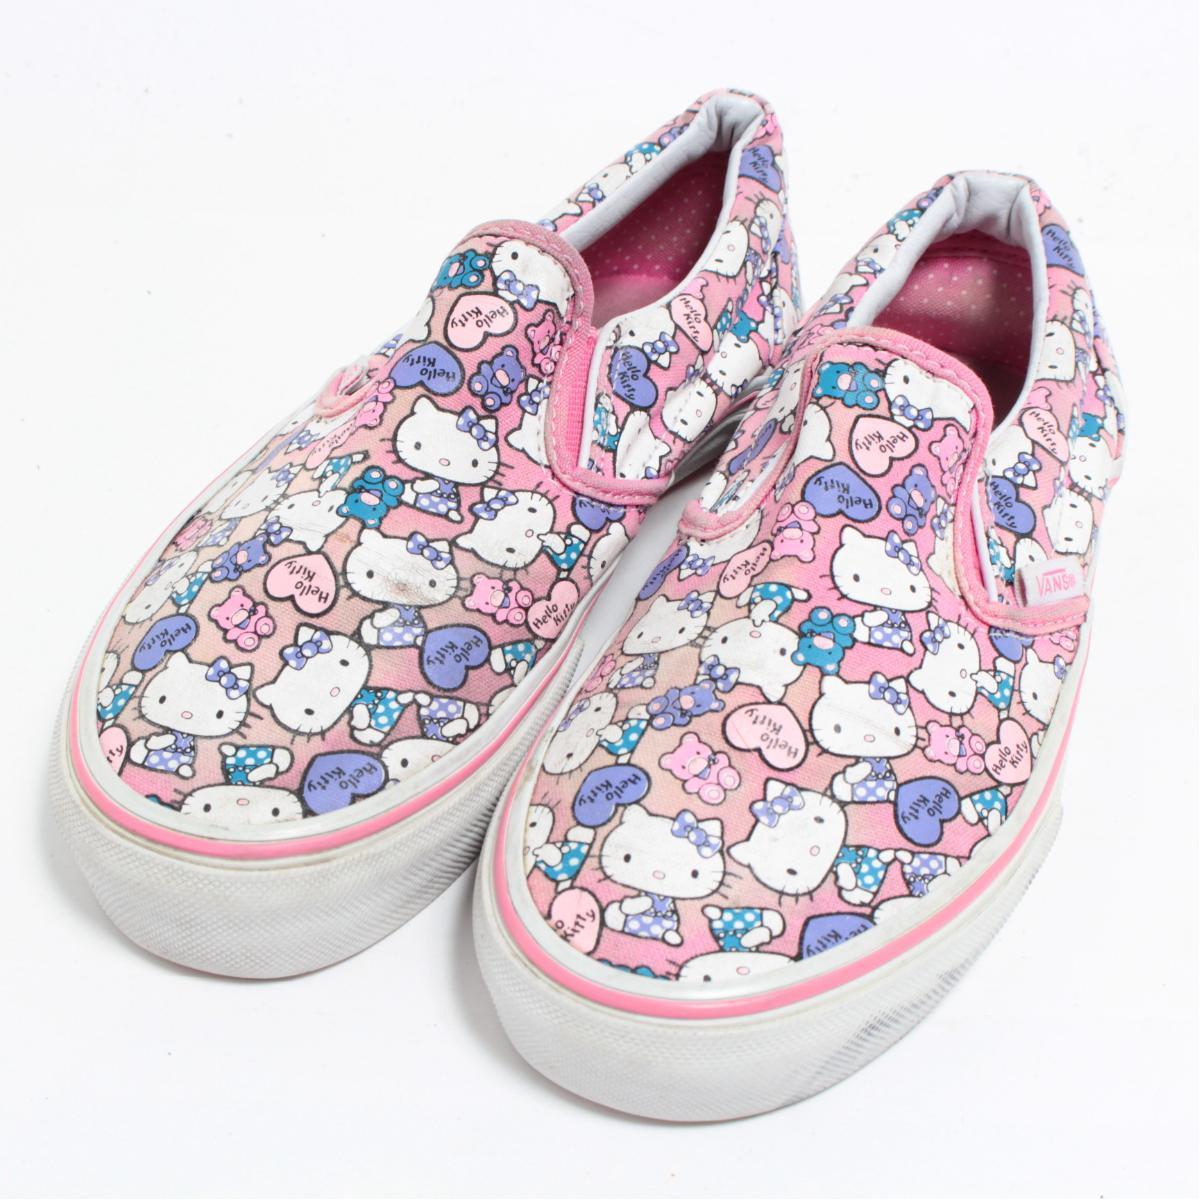 vans shoes for kids hello kitty